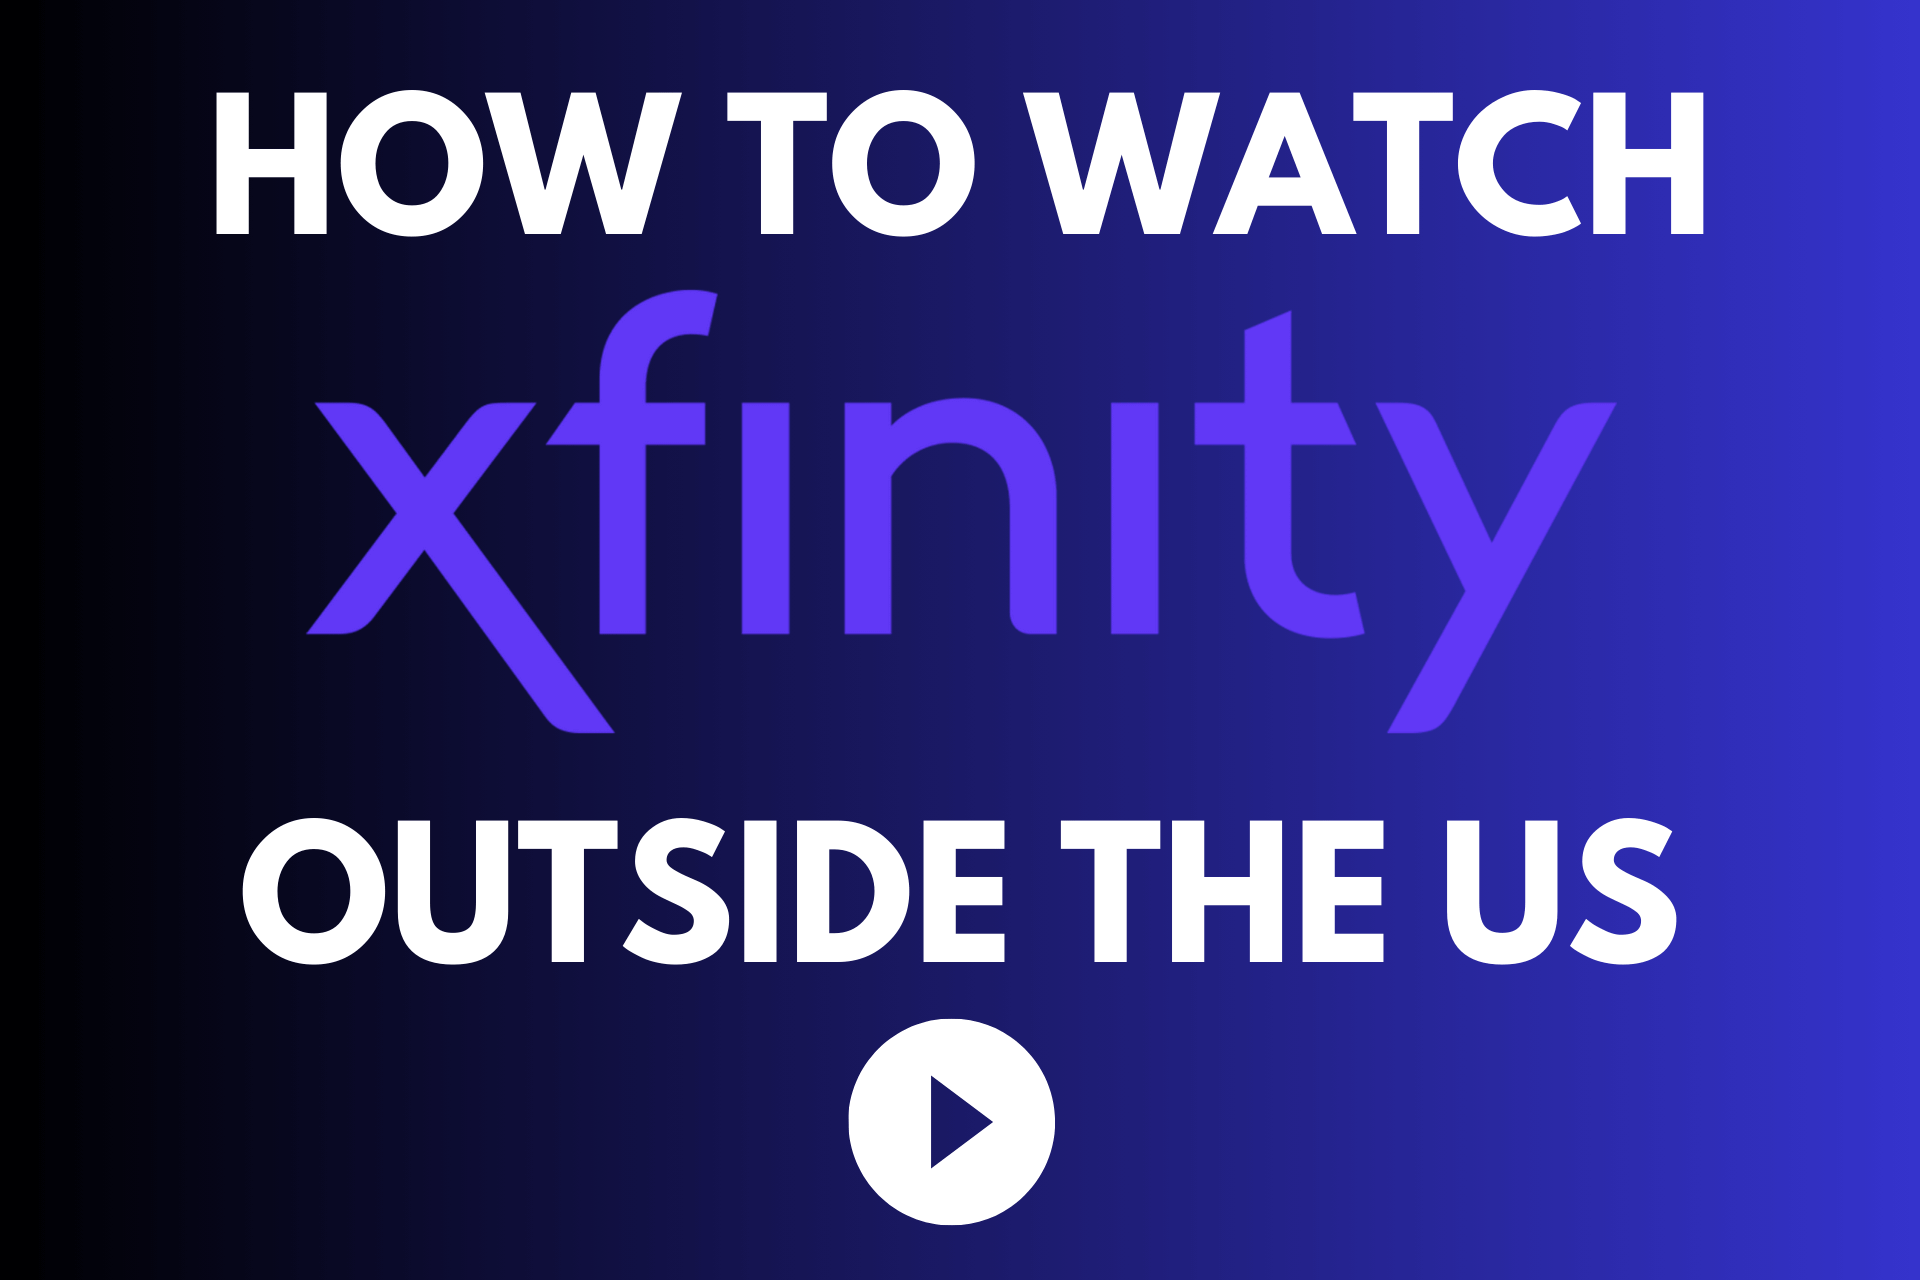 How to Watch Xfinity Outside the US [Step-By-Step Guide]